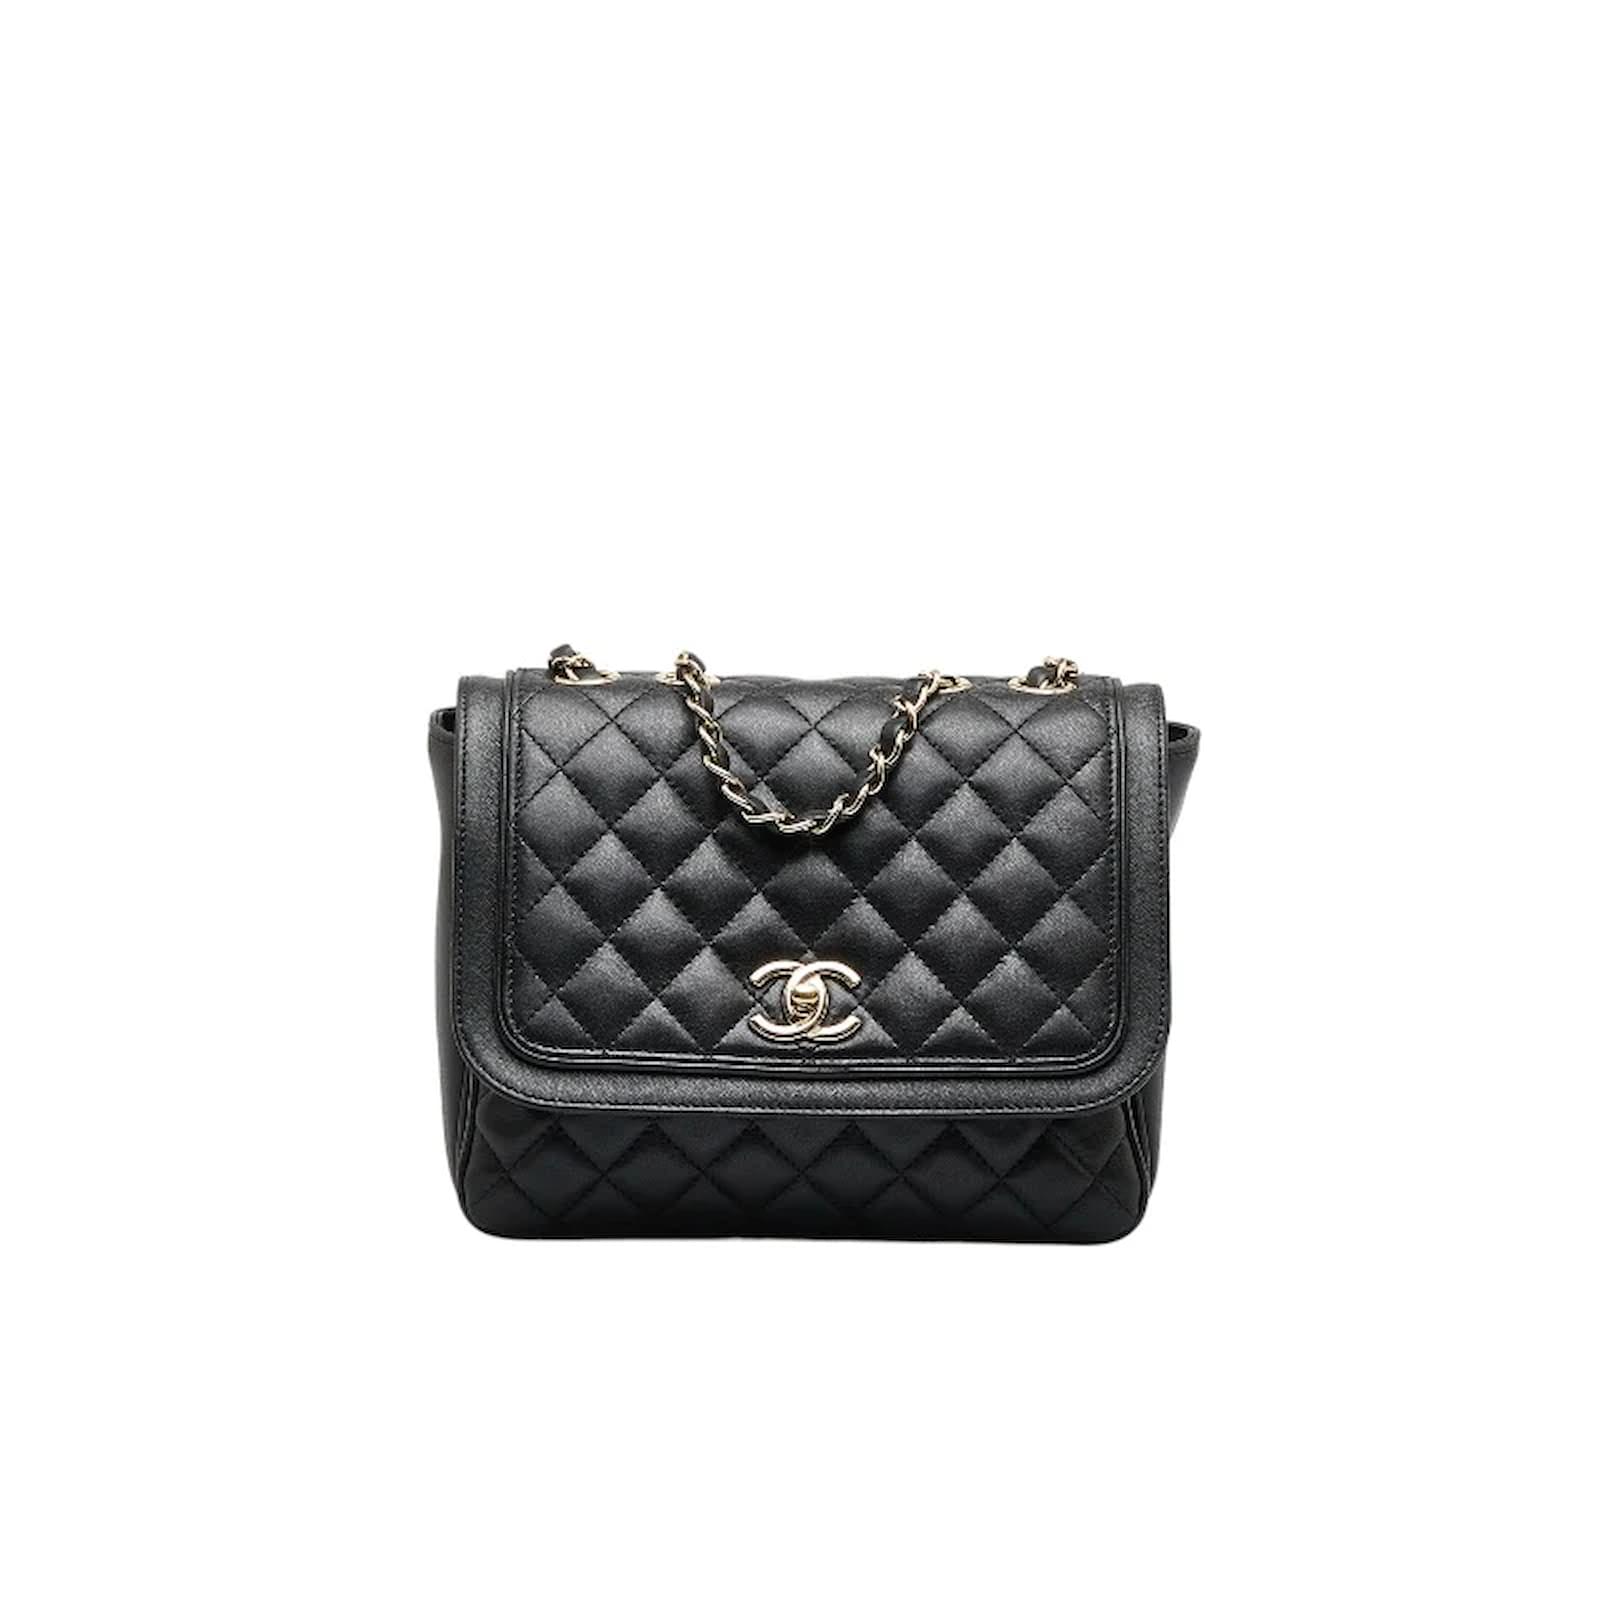 Chanel Black Quilted Lambskin Leather Big Cc Square Single Flap